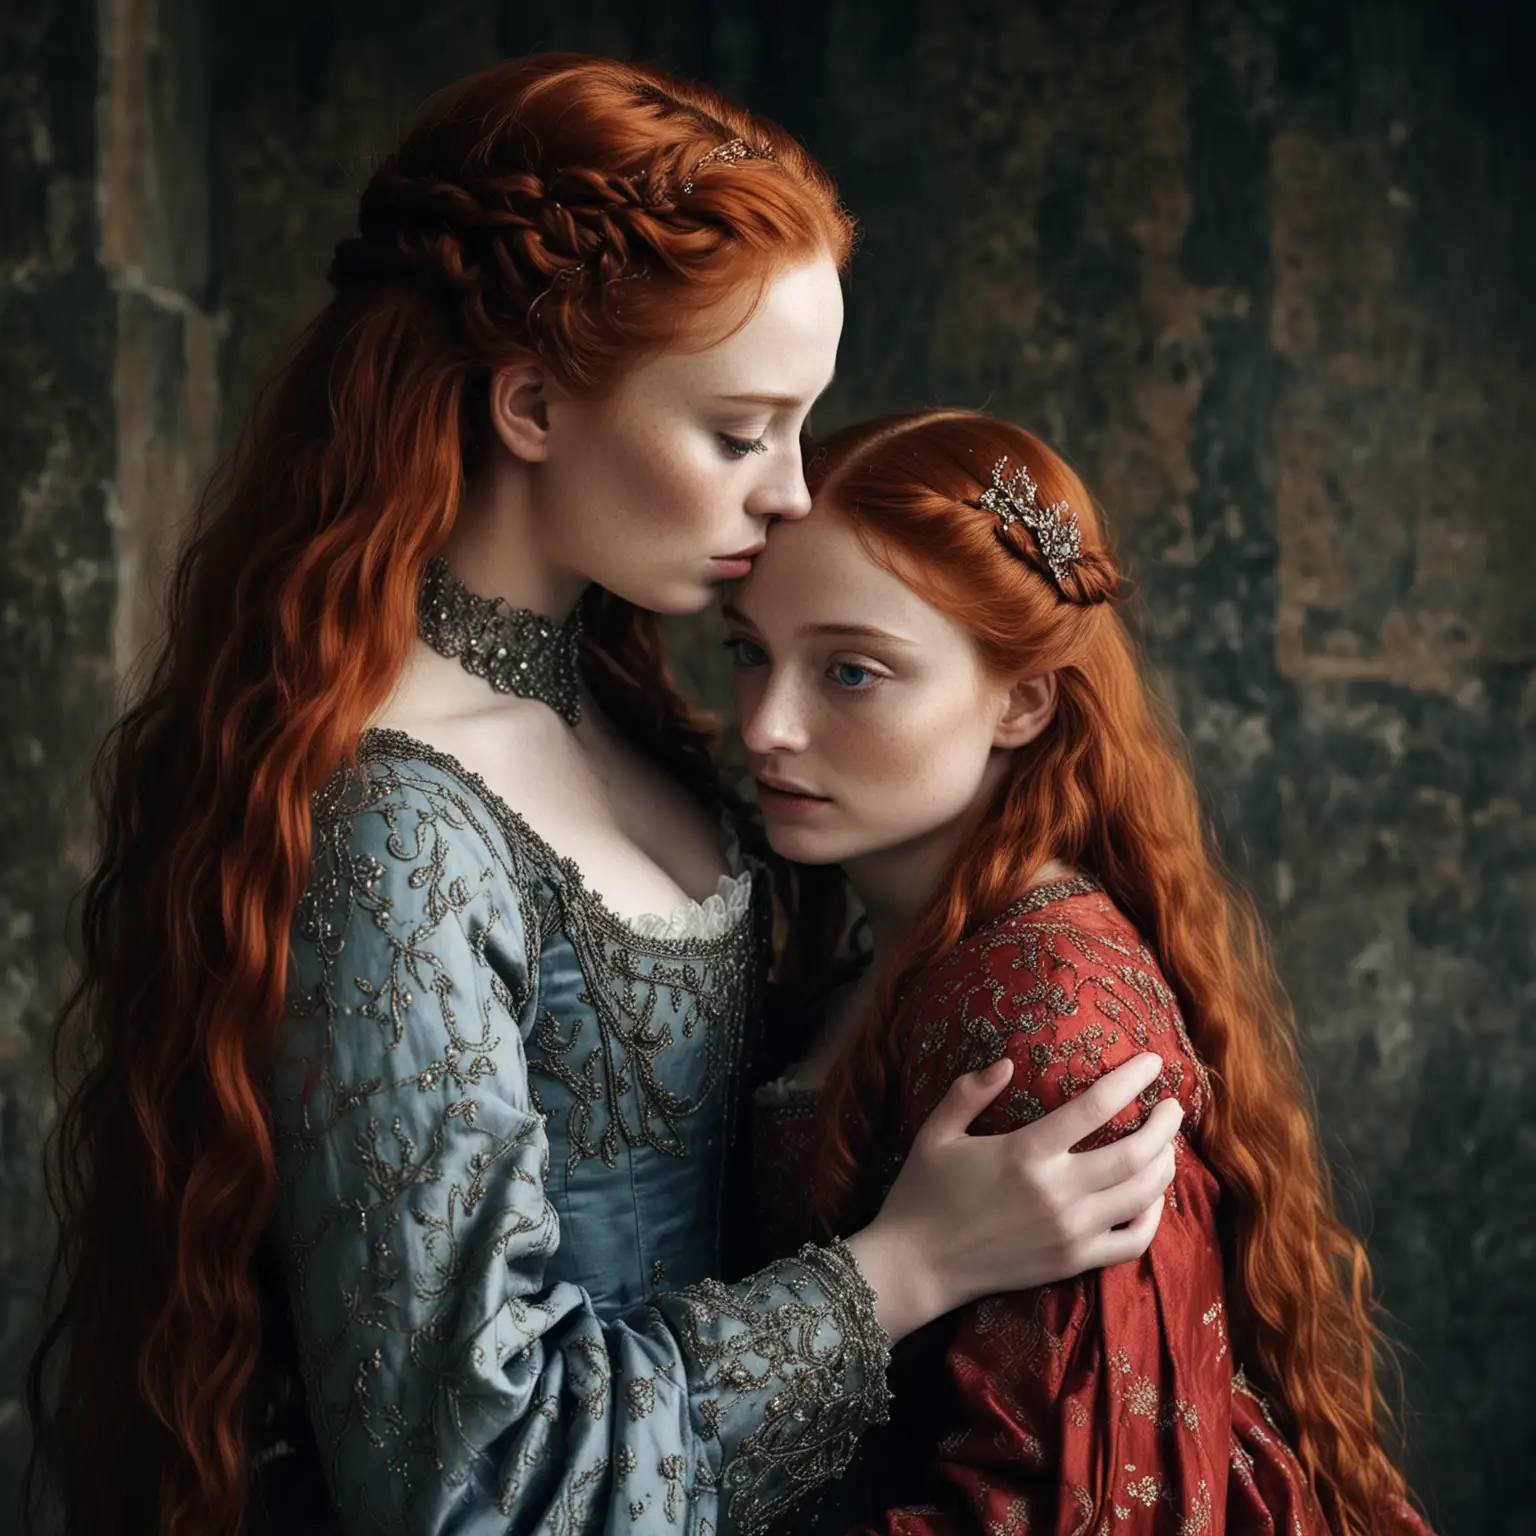 Sansa Stark Inspired by Sophie Turner Embracing a Young Boy in Medieval Chamber